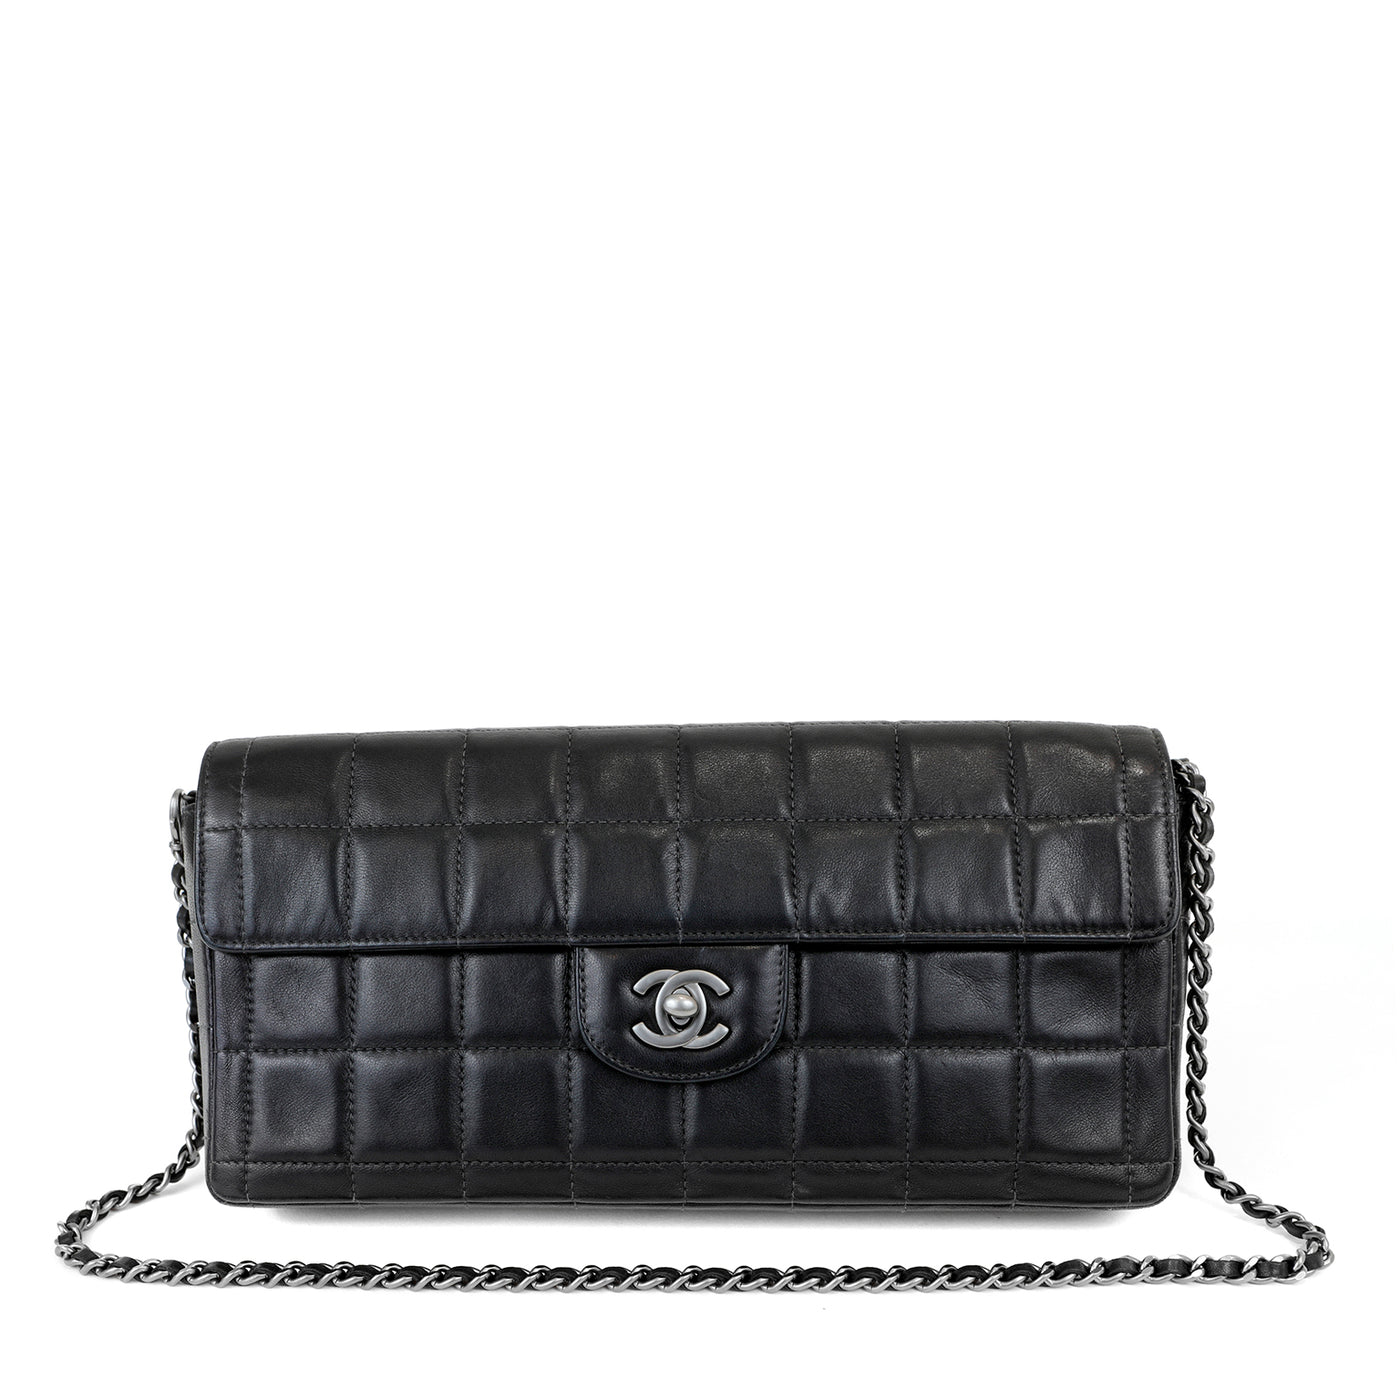 Chanel Black Lambskin Chocolate Bar Quilted East West Classic with Silver Hardware